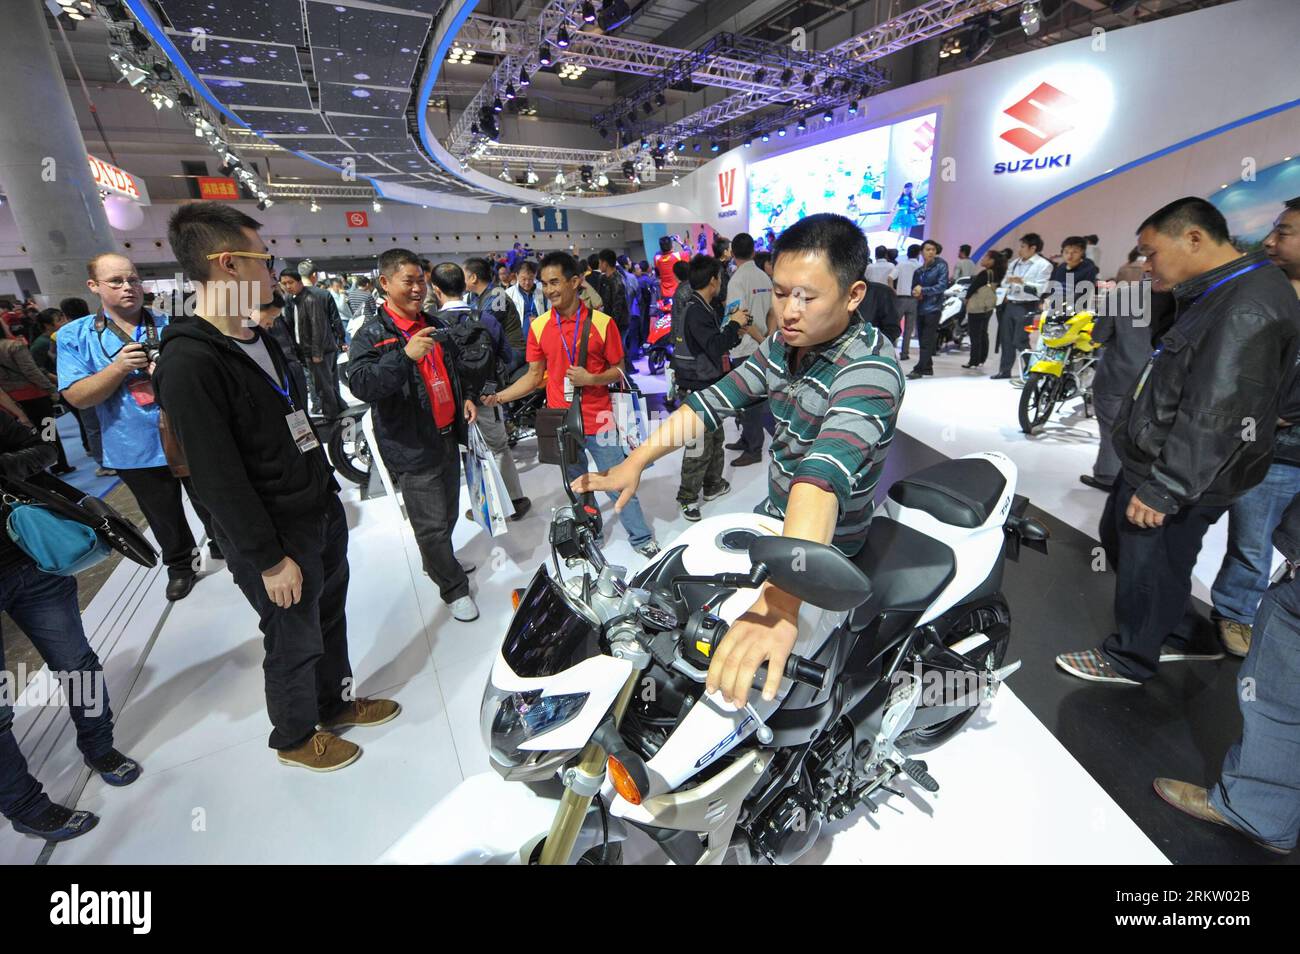 Bildnummer: 58577700  Datum: 11.10.2012  Copyright: imago/Xinhua (121011) -- CHONGQING, Oct. 11, 2012 (Xinhua) -- A visitor experiences trial ride on a demostic motorcycle exhibited in the 11th China International Motorcycle Trade Exhibition in southwest China s Chongqing Municipality, Oct. 11, 2012. More than 400 motorcycle companies from 10 countries and regions attended the four-day expo kicked off on Thursday. About 100 international traders also participated in the fair, and the purchase sum is expected to exceed 100 million U.S. dollars. (Xinhua/Liu Chan) (hy) CHINA-CHONGQING-MOTOR CYCLE Stock Photo